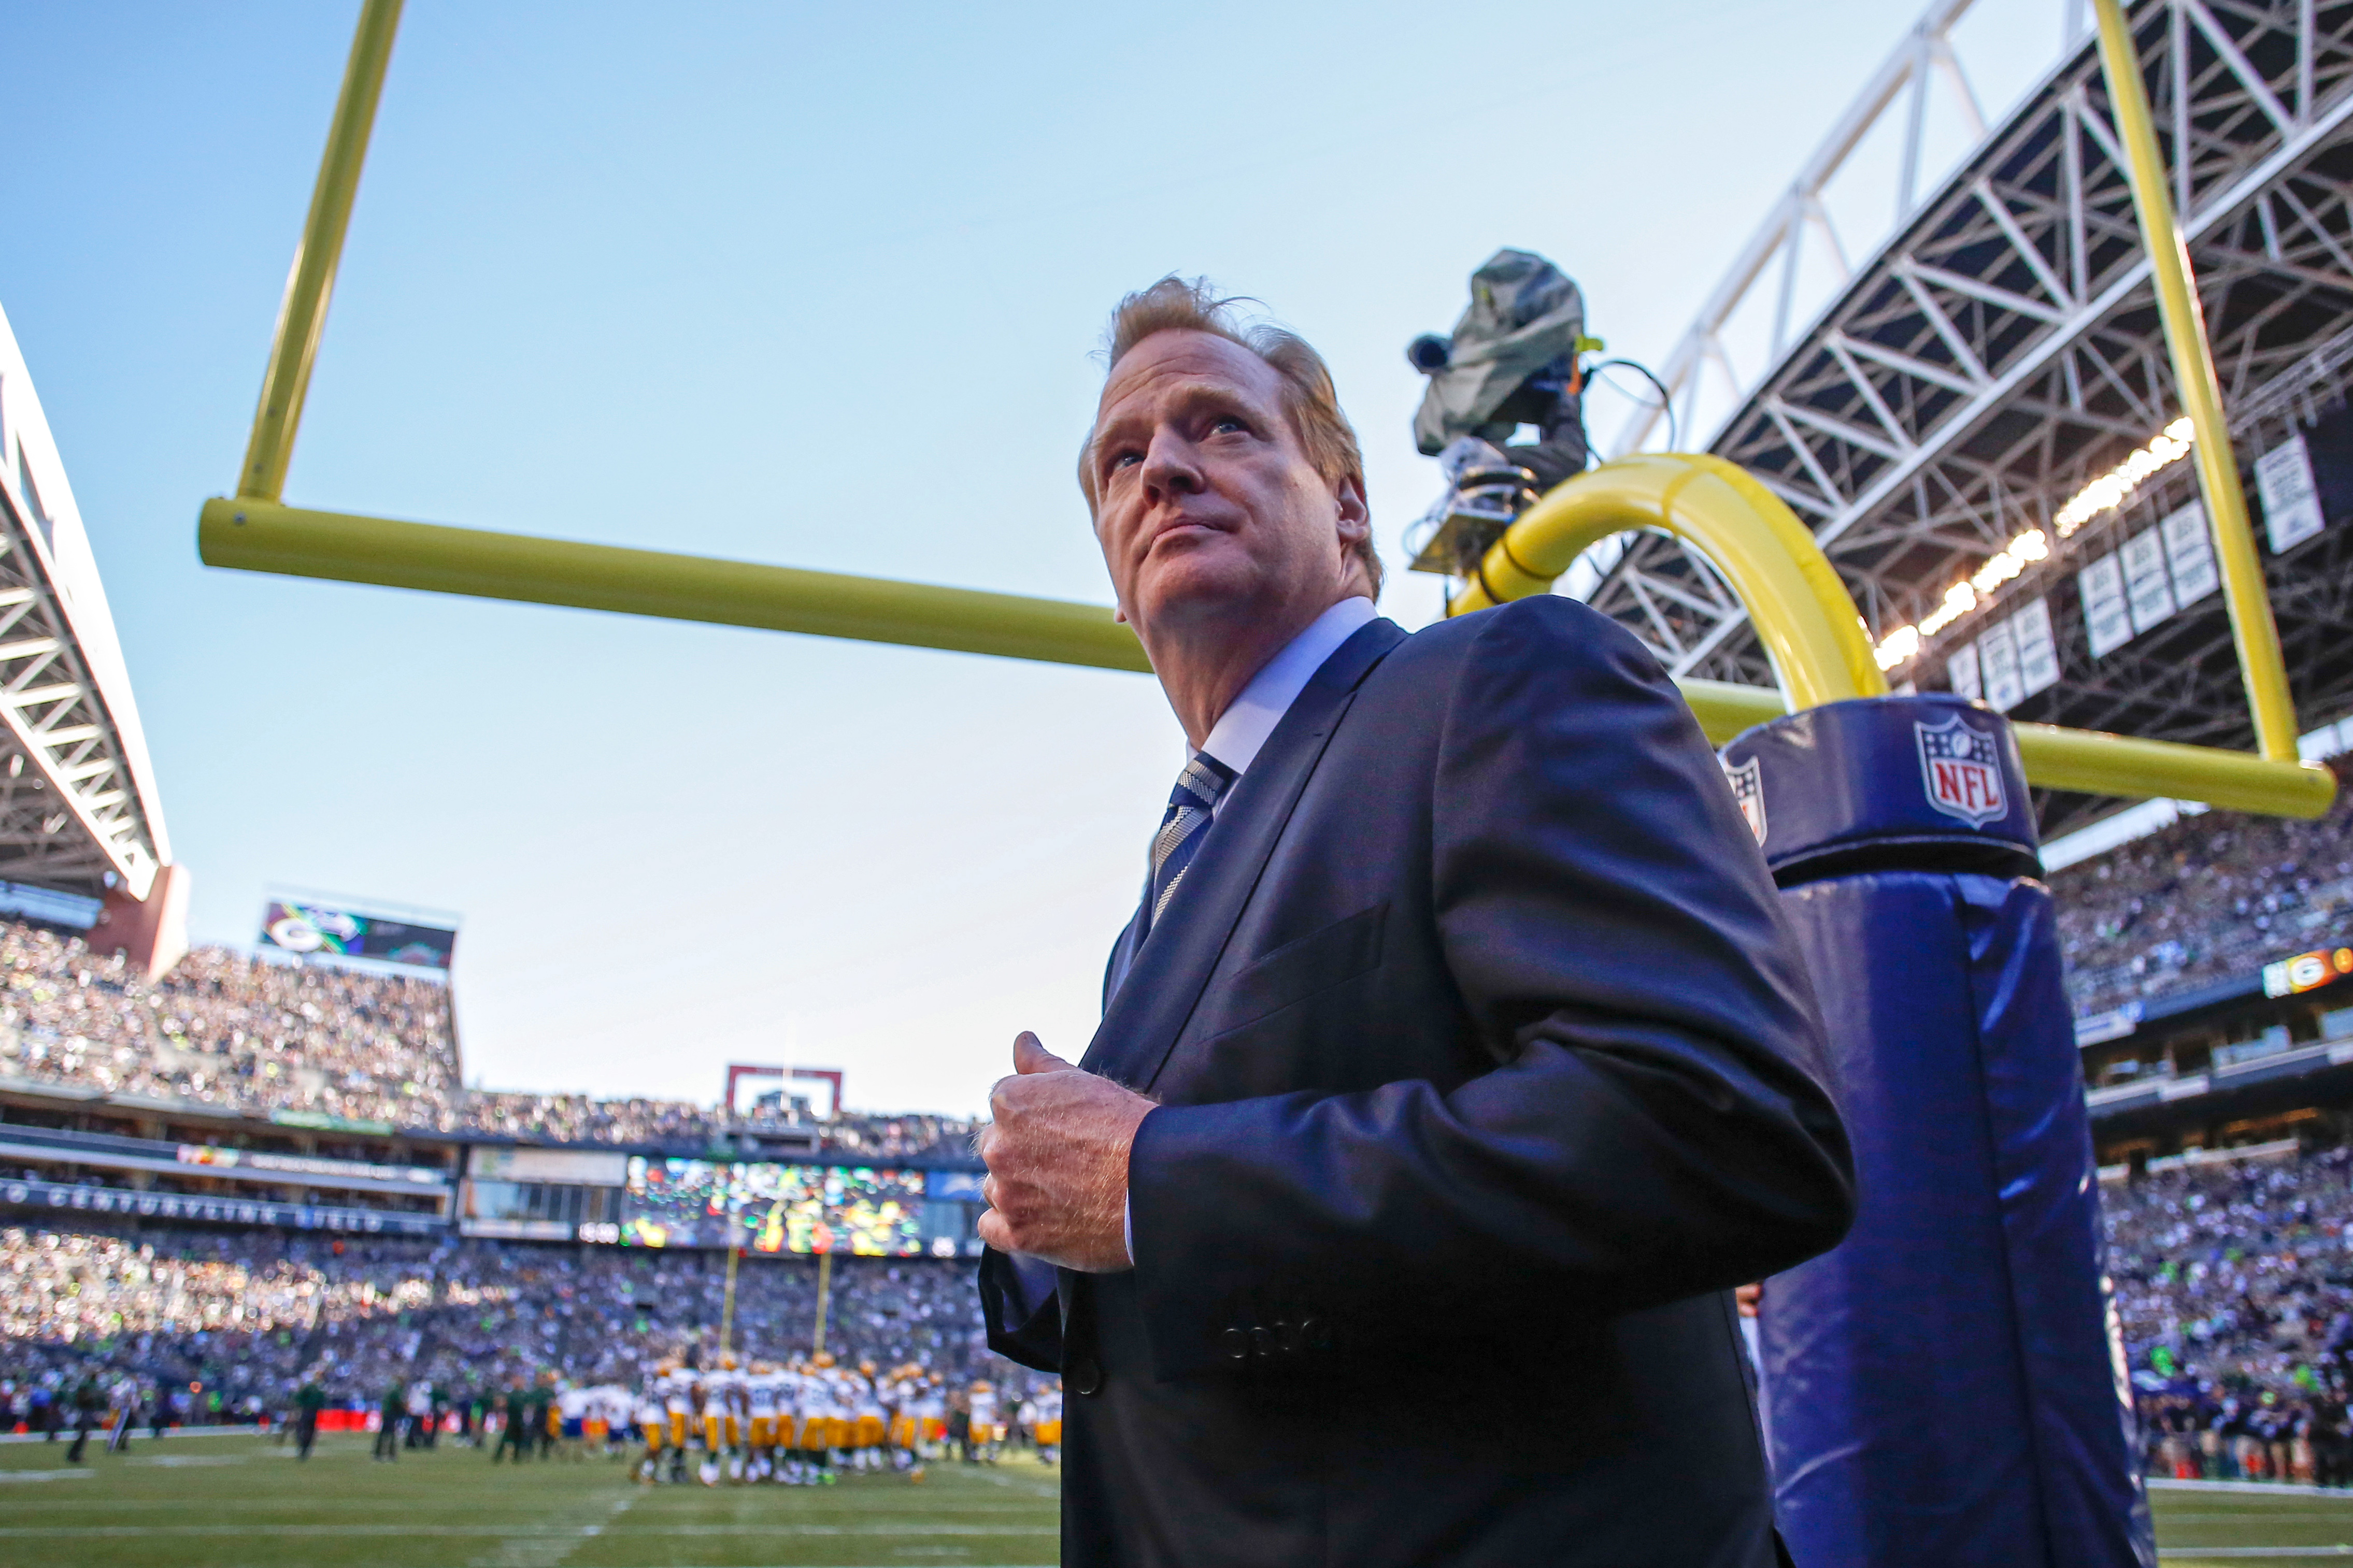 NFL commissioner Roger Goodell walks the sidelines prior to the game between the Seattle Seahawks and the Green Bay Packers at CenturyLink Field in Seattle on Sept. 4, 2014 (Otto Greule Jr—Getty Images)